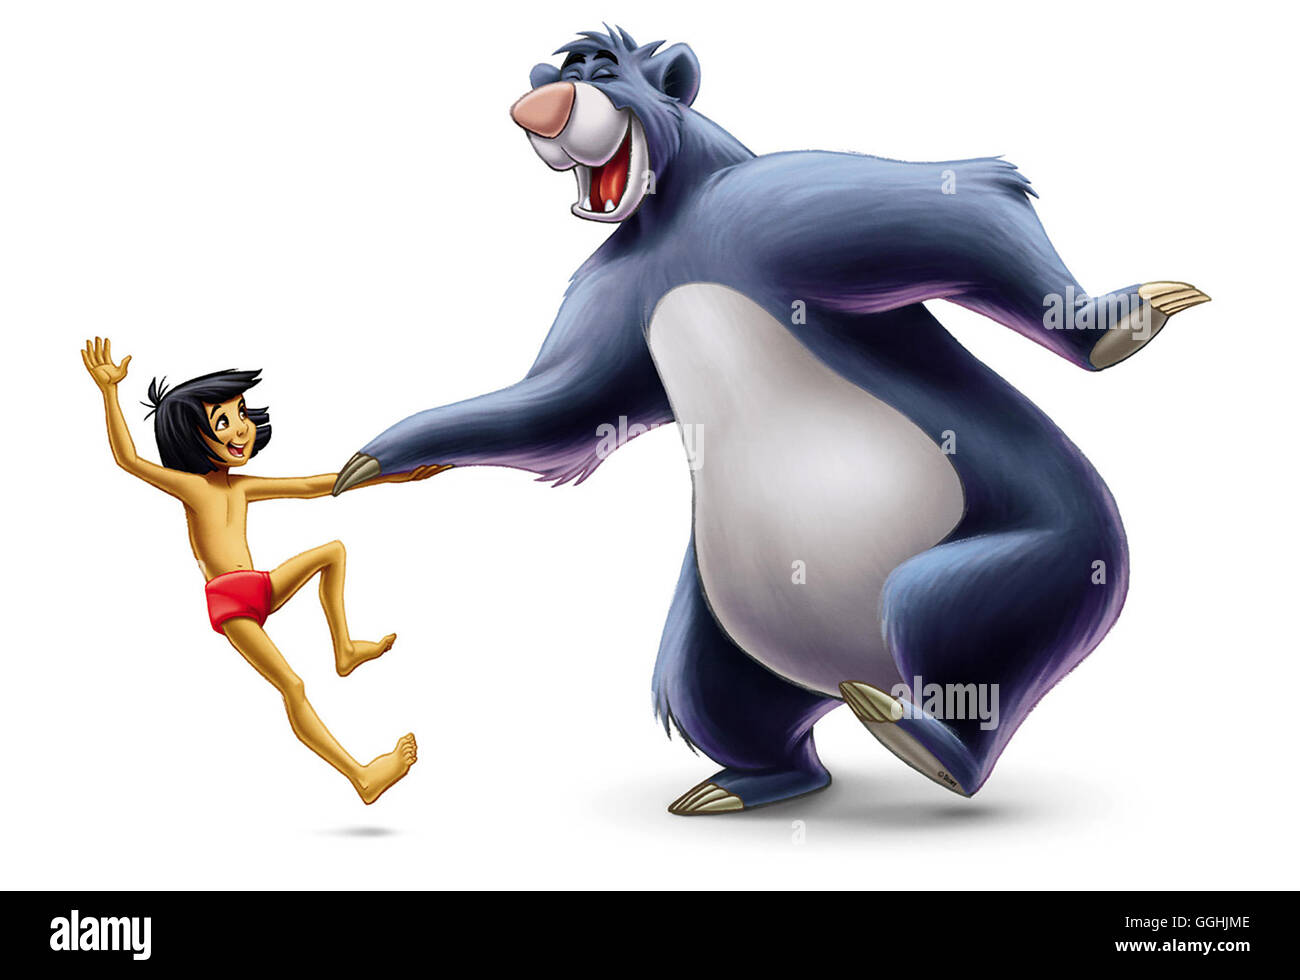 The jungle book Cut Out Stock Images & Pictures - Alamy